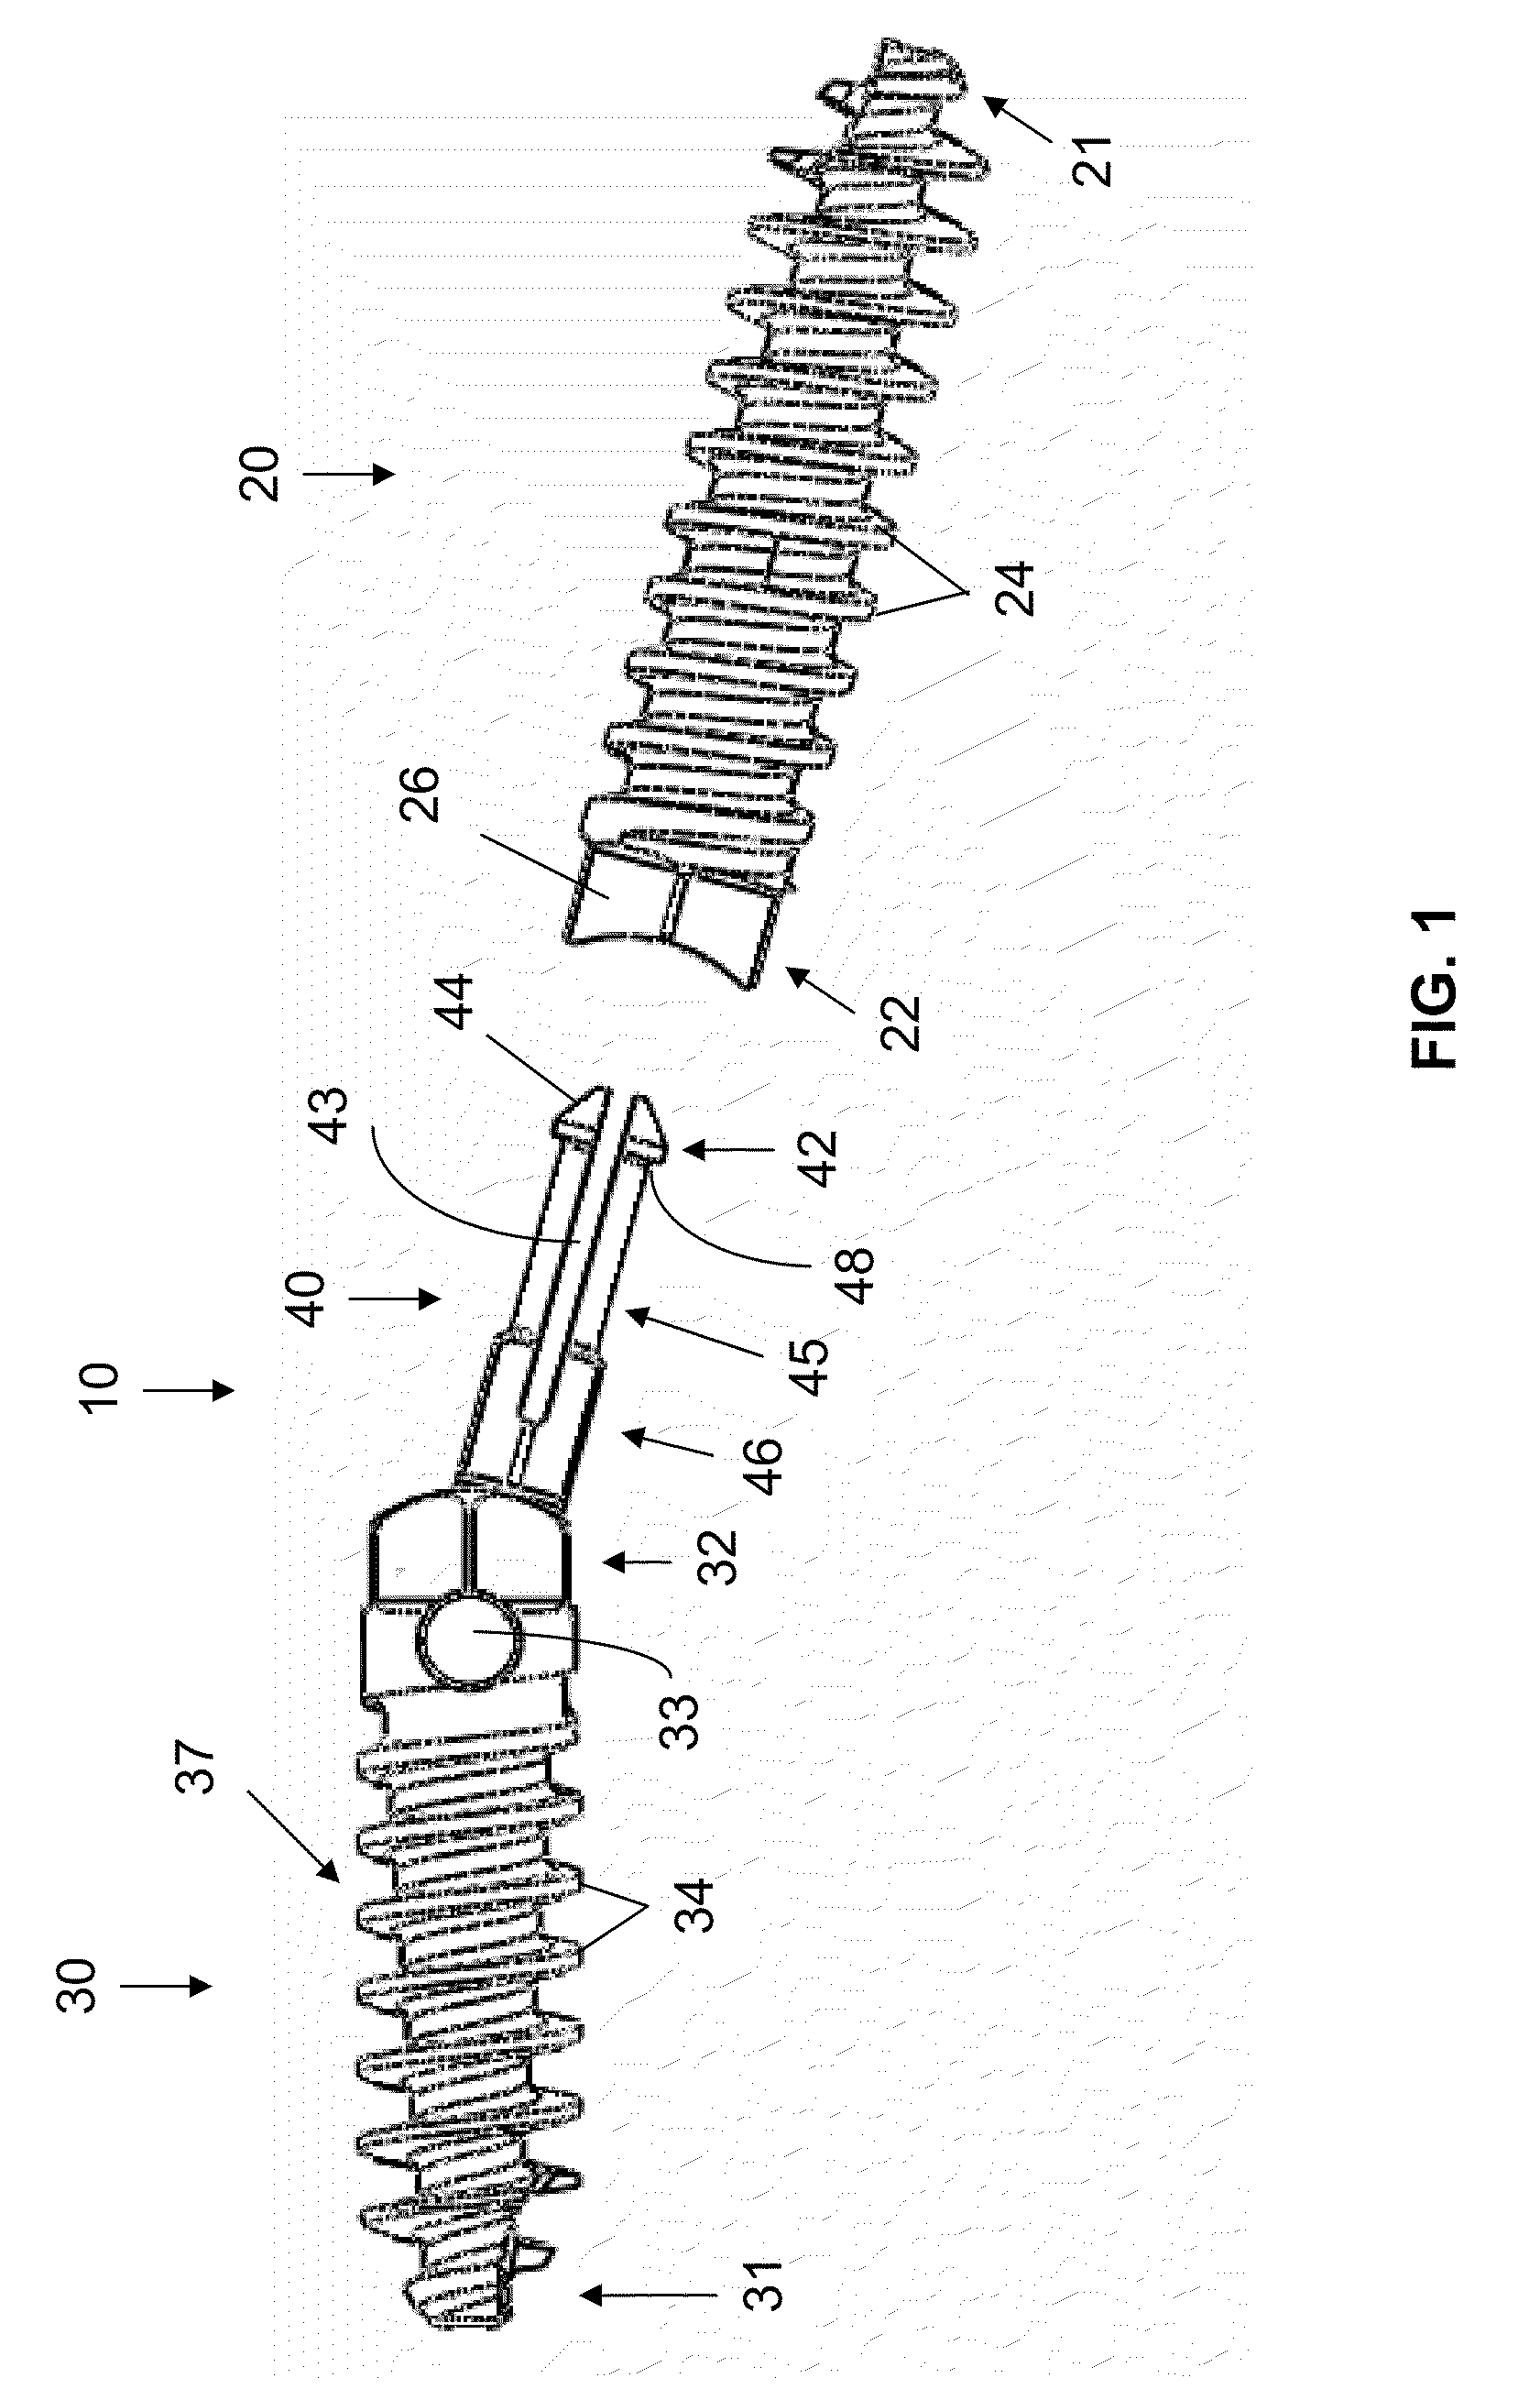 Bone joining apparatus and method